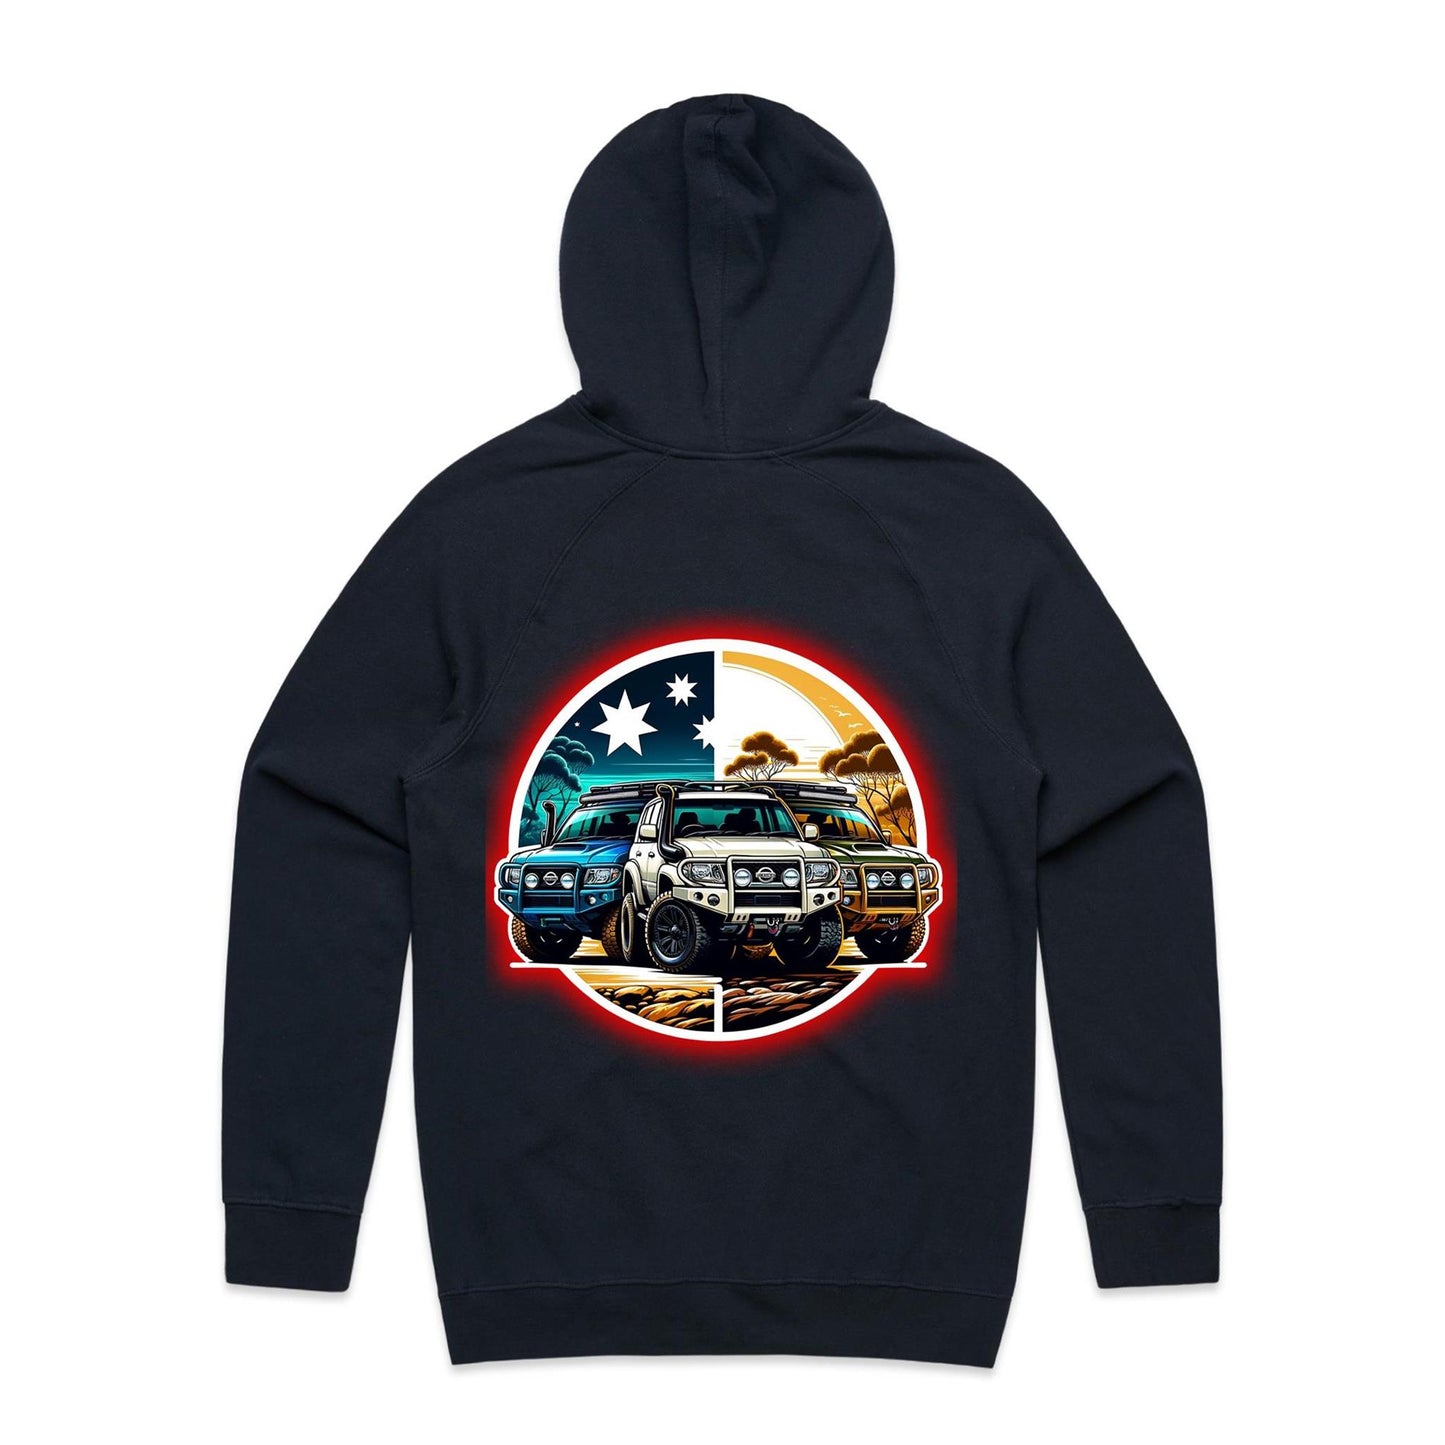 Wrecked 4x4 Hoodie Design 2 | AS Colour - Supply Hood